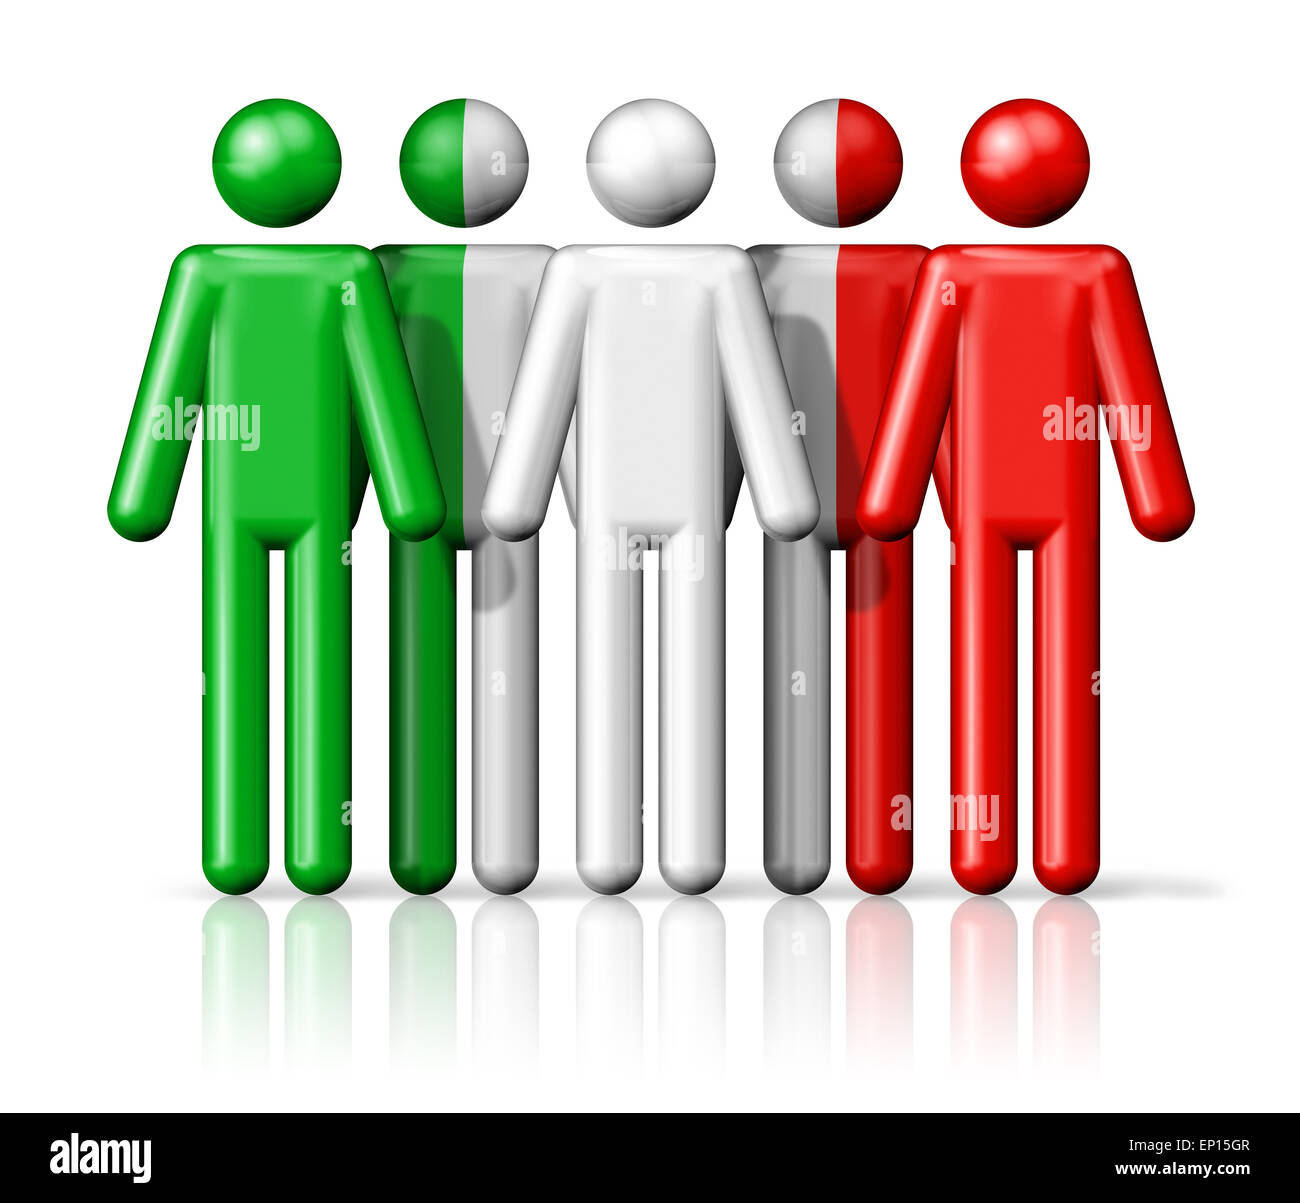 Flag of Italy on stick figure - national and social community symbol 3D icon Stock Photo